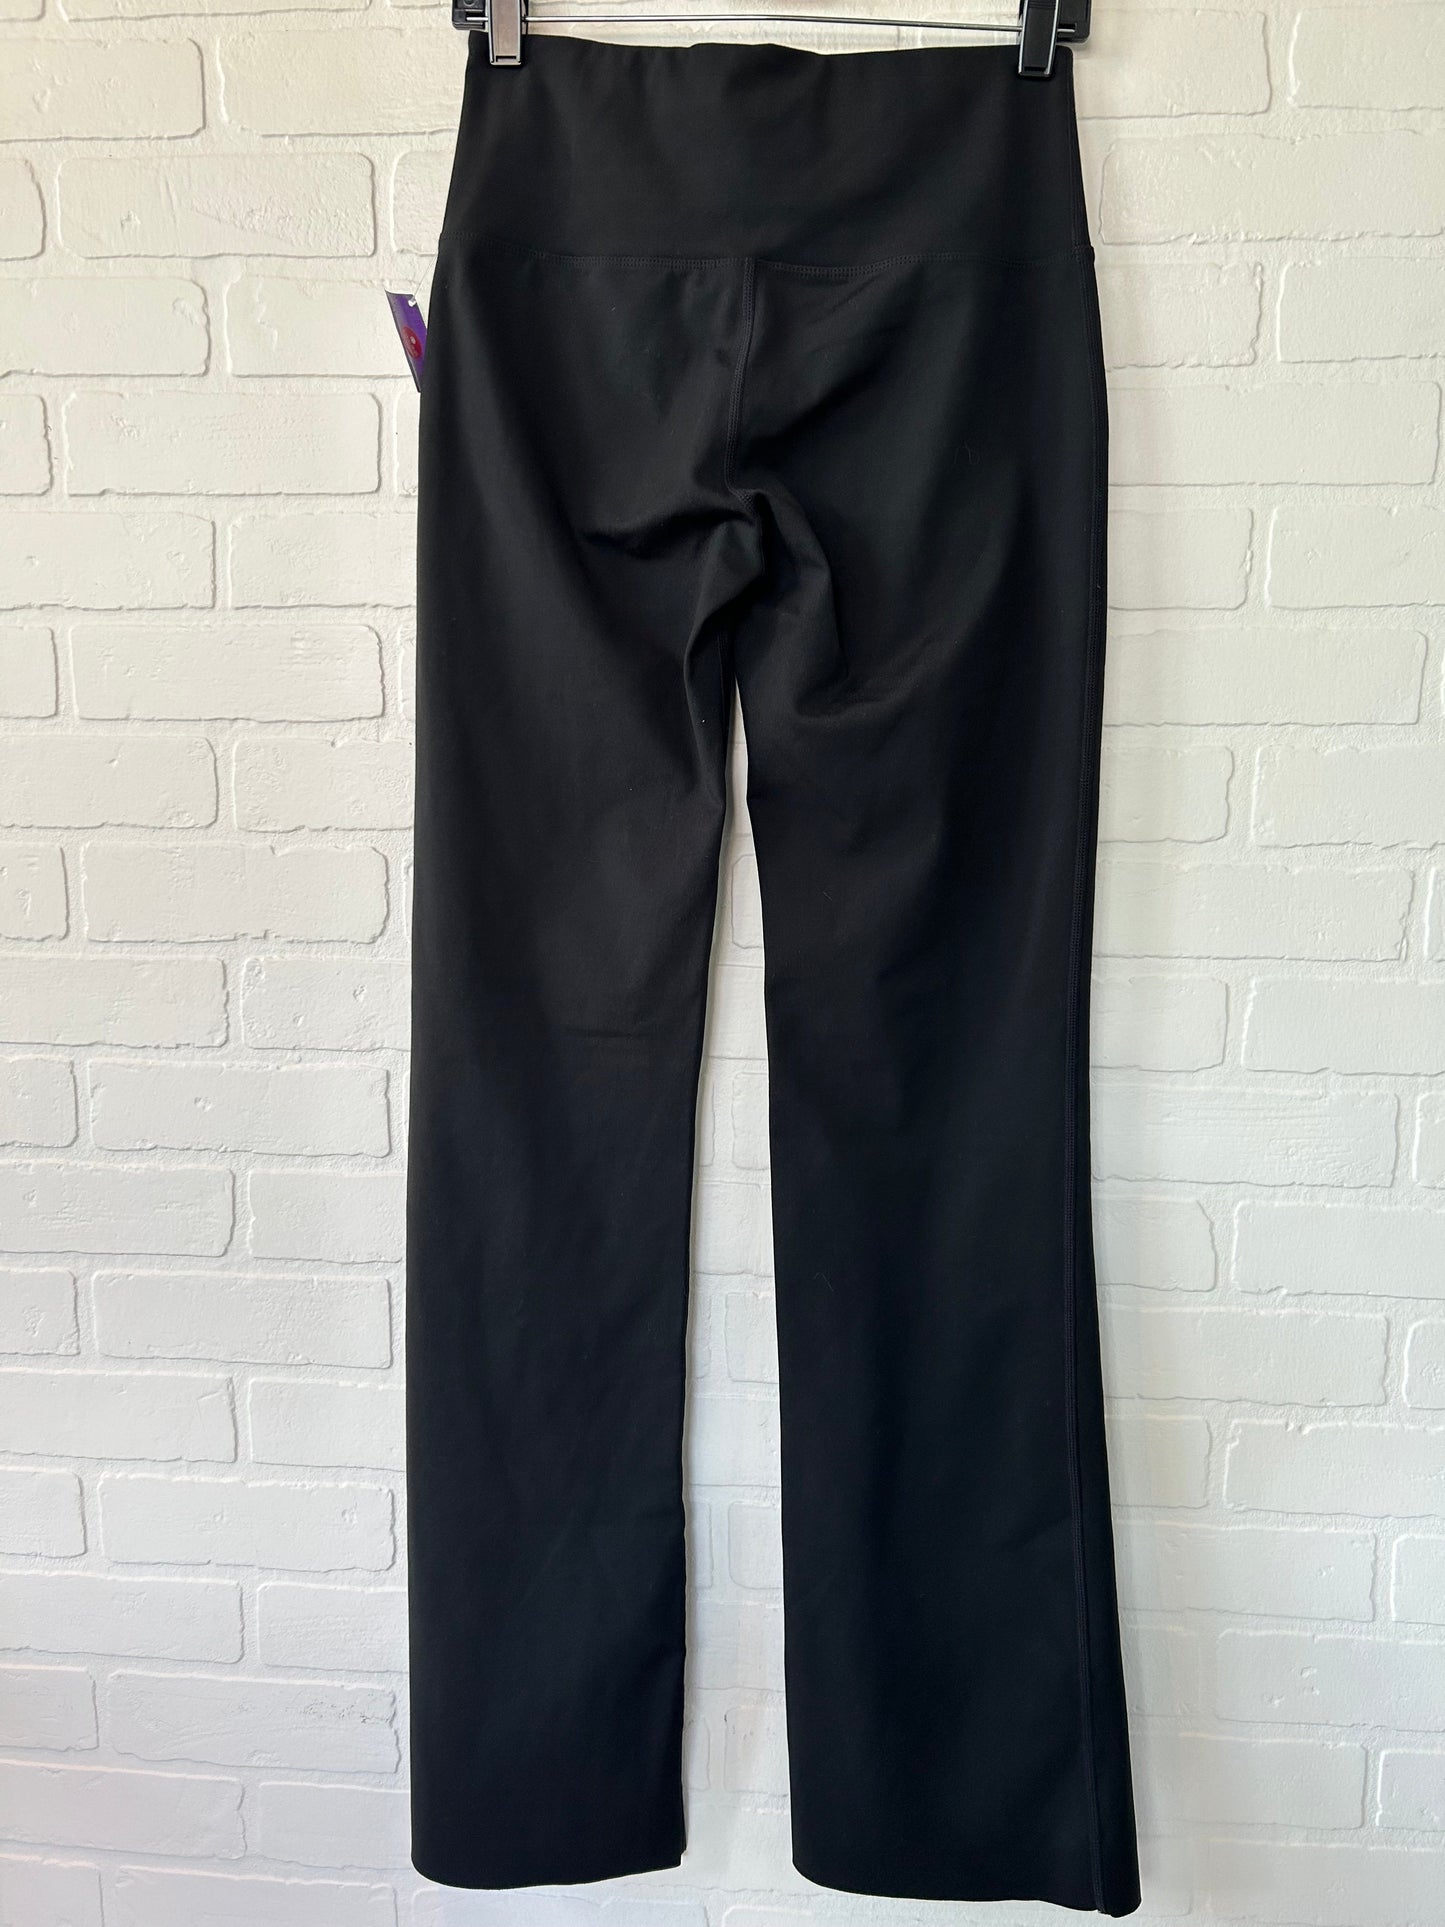 Athletic Pants By Clothes Mentor  Size: 8